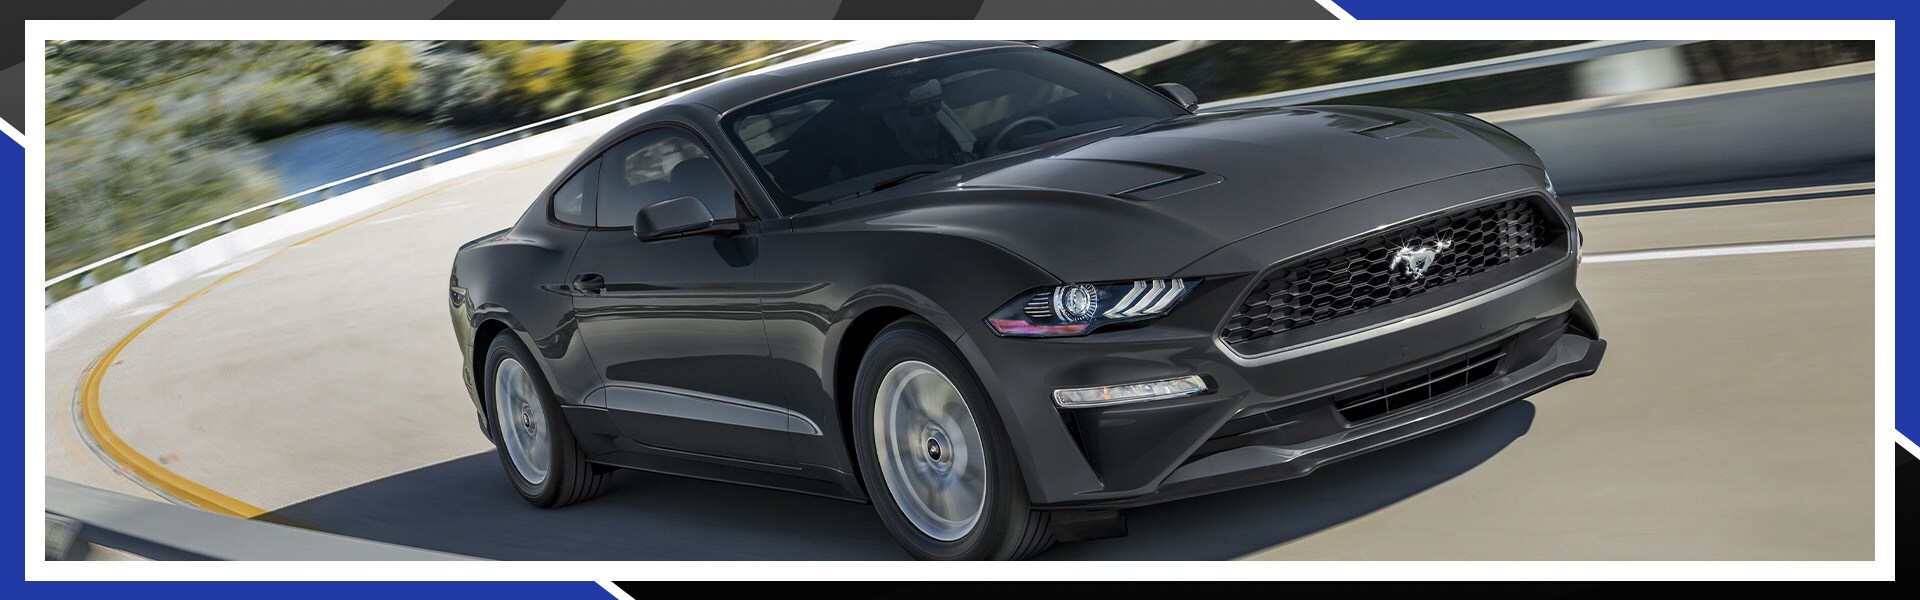 2022 Ford Mustang Milford Ohio